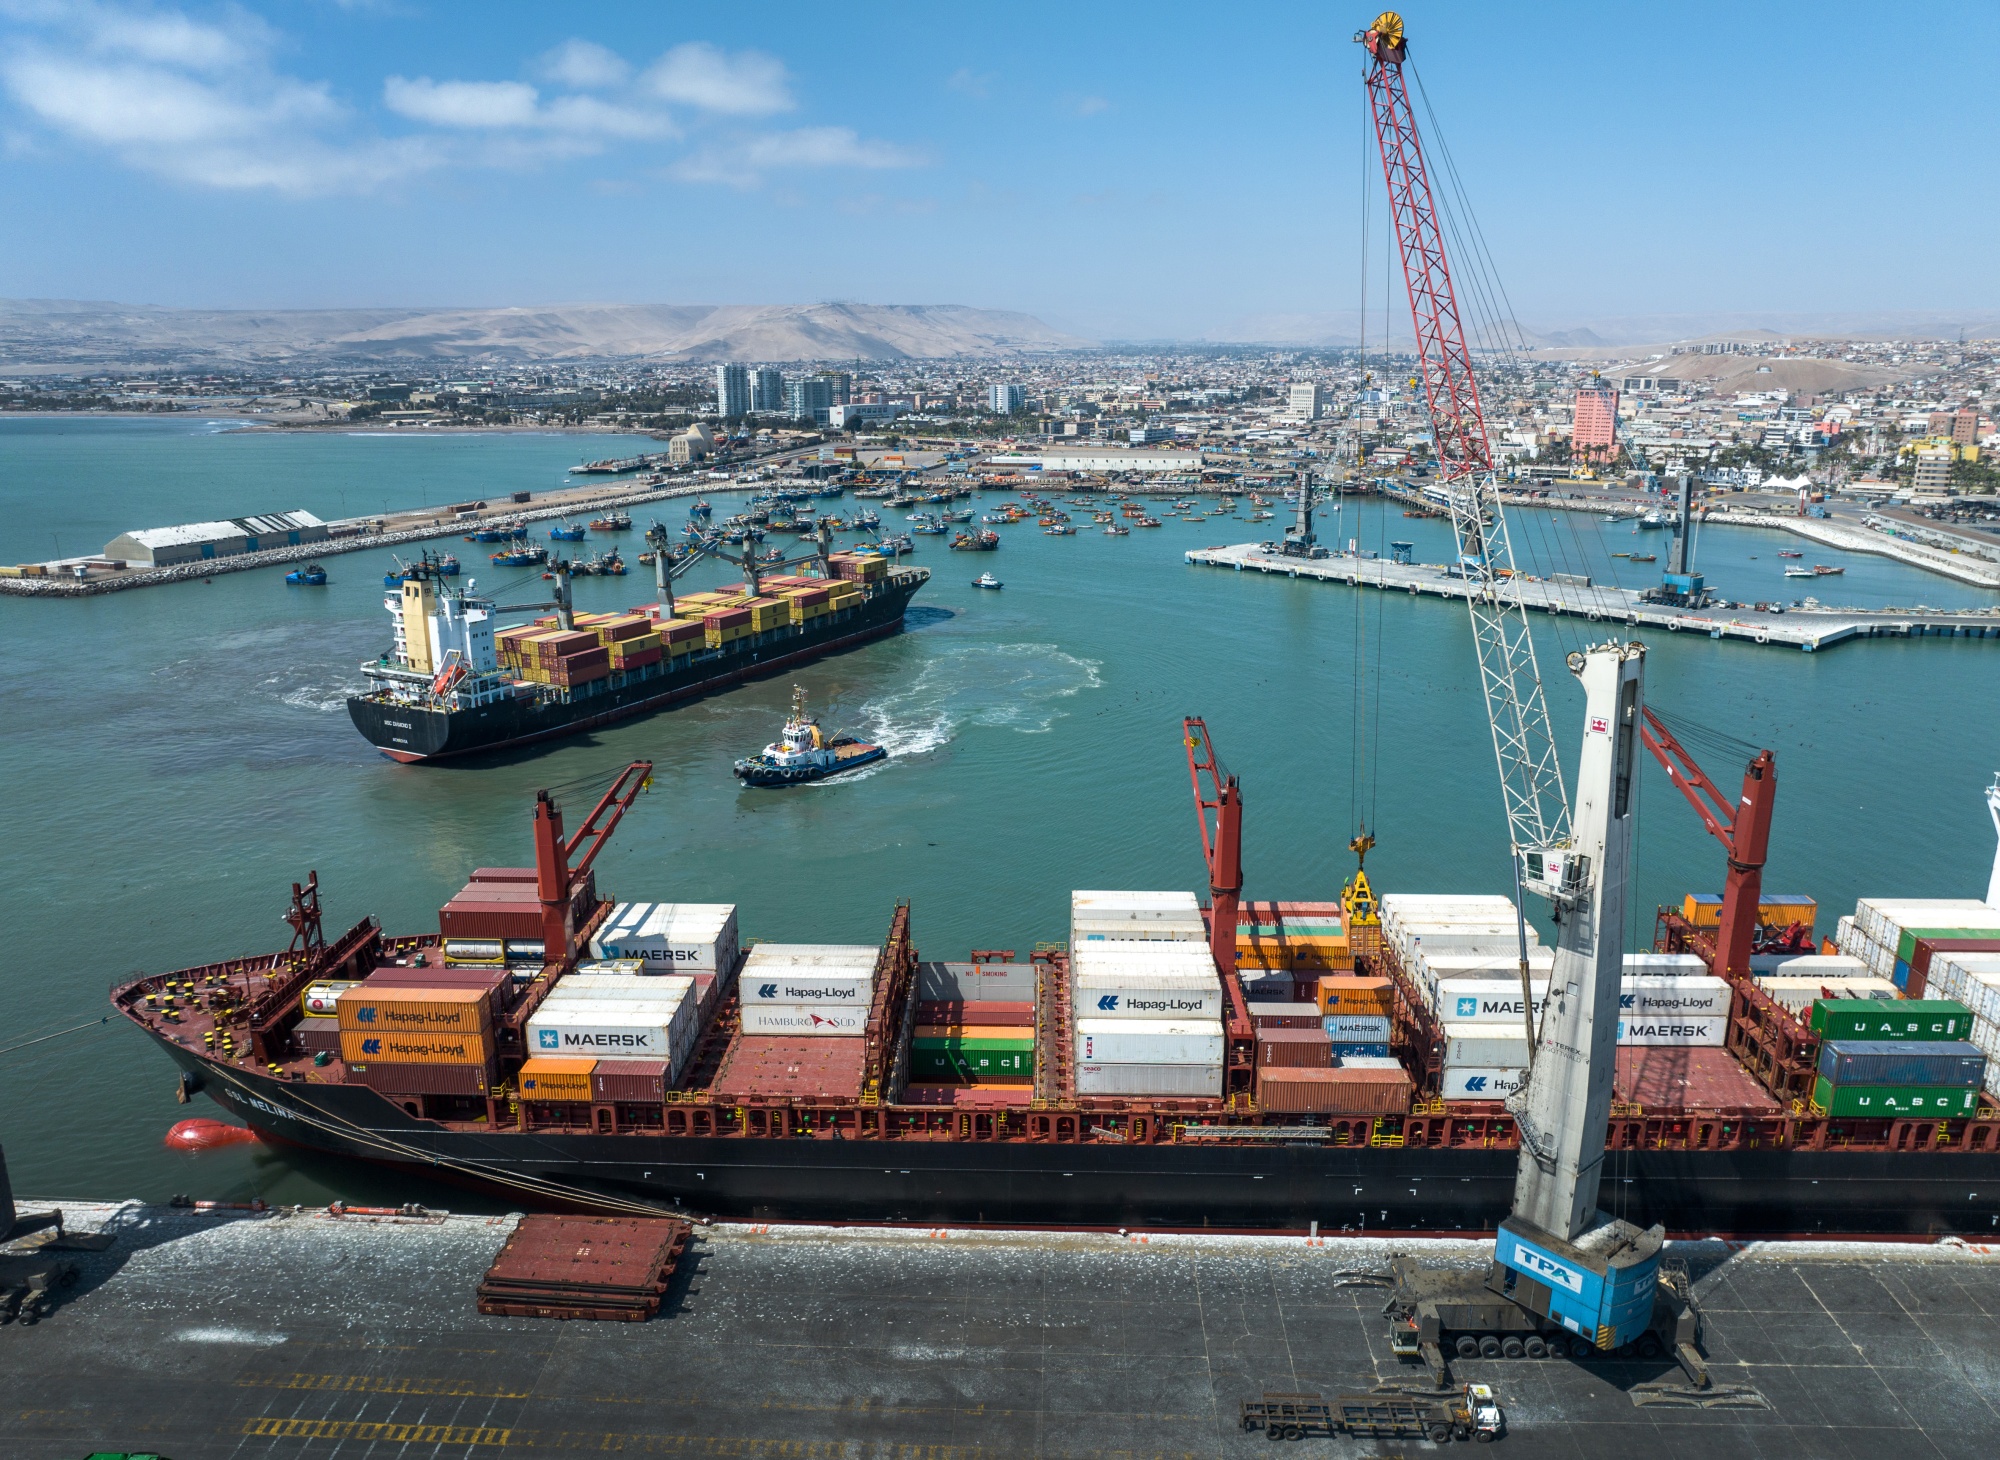 Chile's Commodity Exports at Risk of Delay Due to Port Workers' Strike